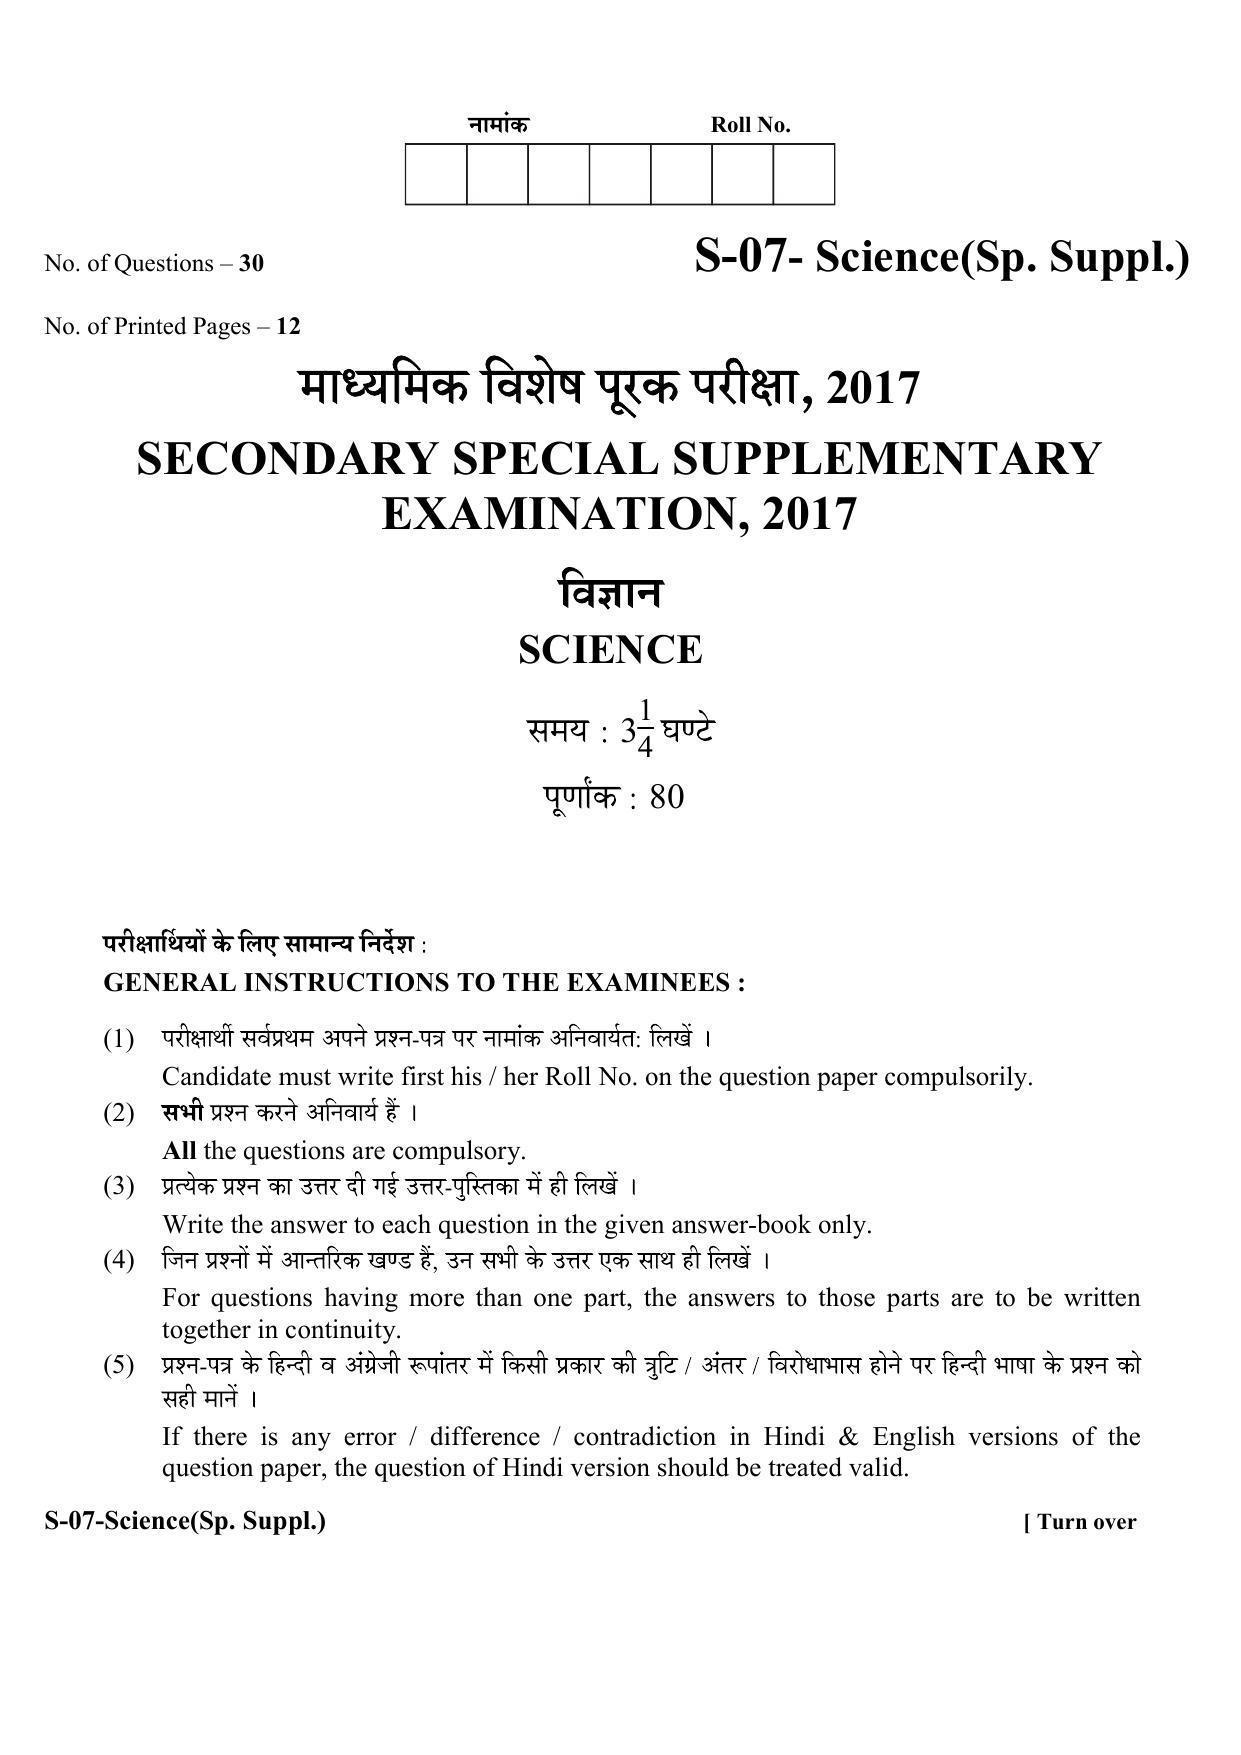 RBSE Class 10 Science ( supplementary) 2017 Question Paper - Page 1